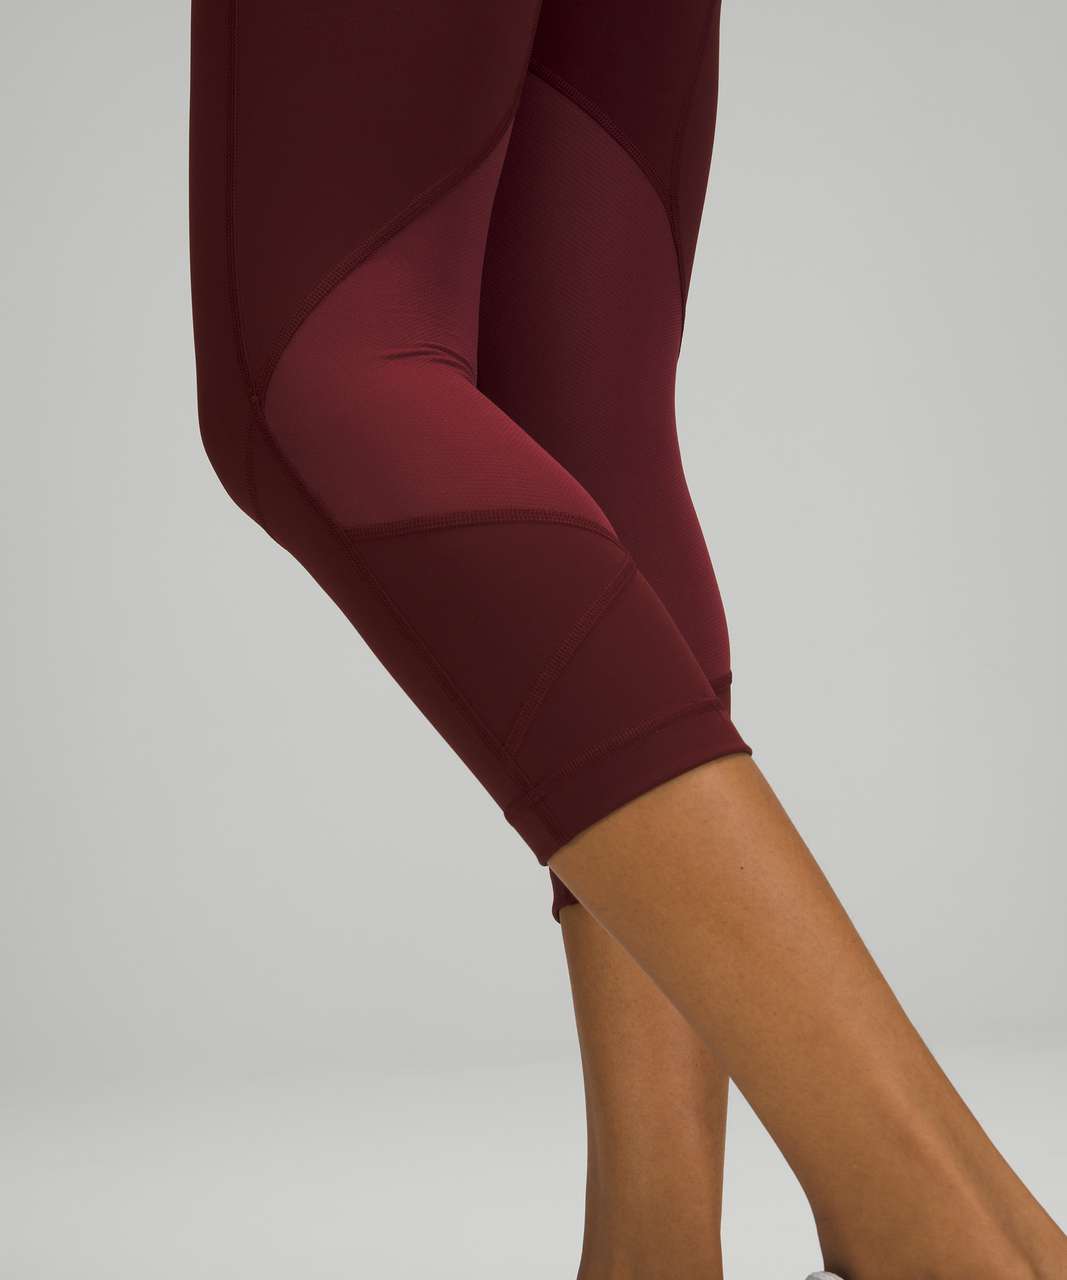 Lululemon Pace Rival High-Rise Crop 22" - Red Merlot